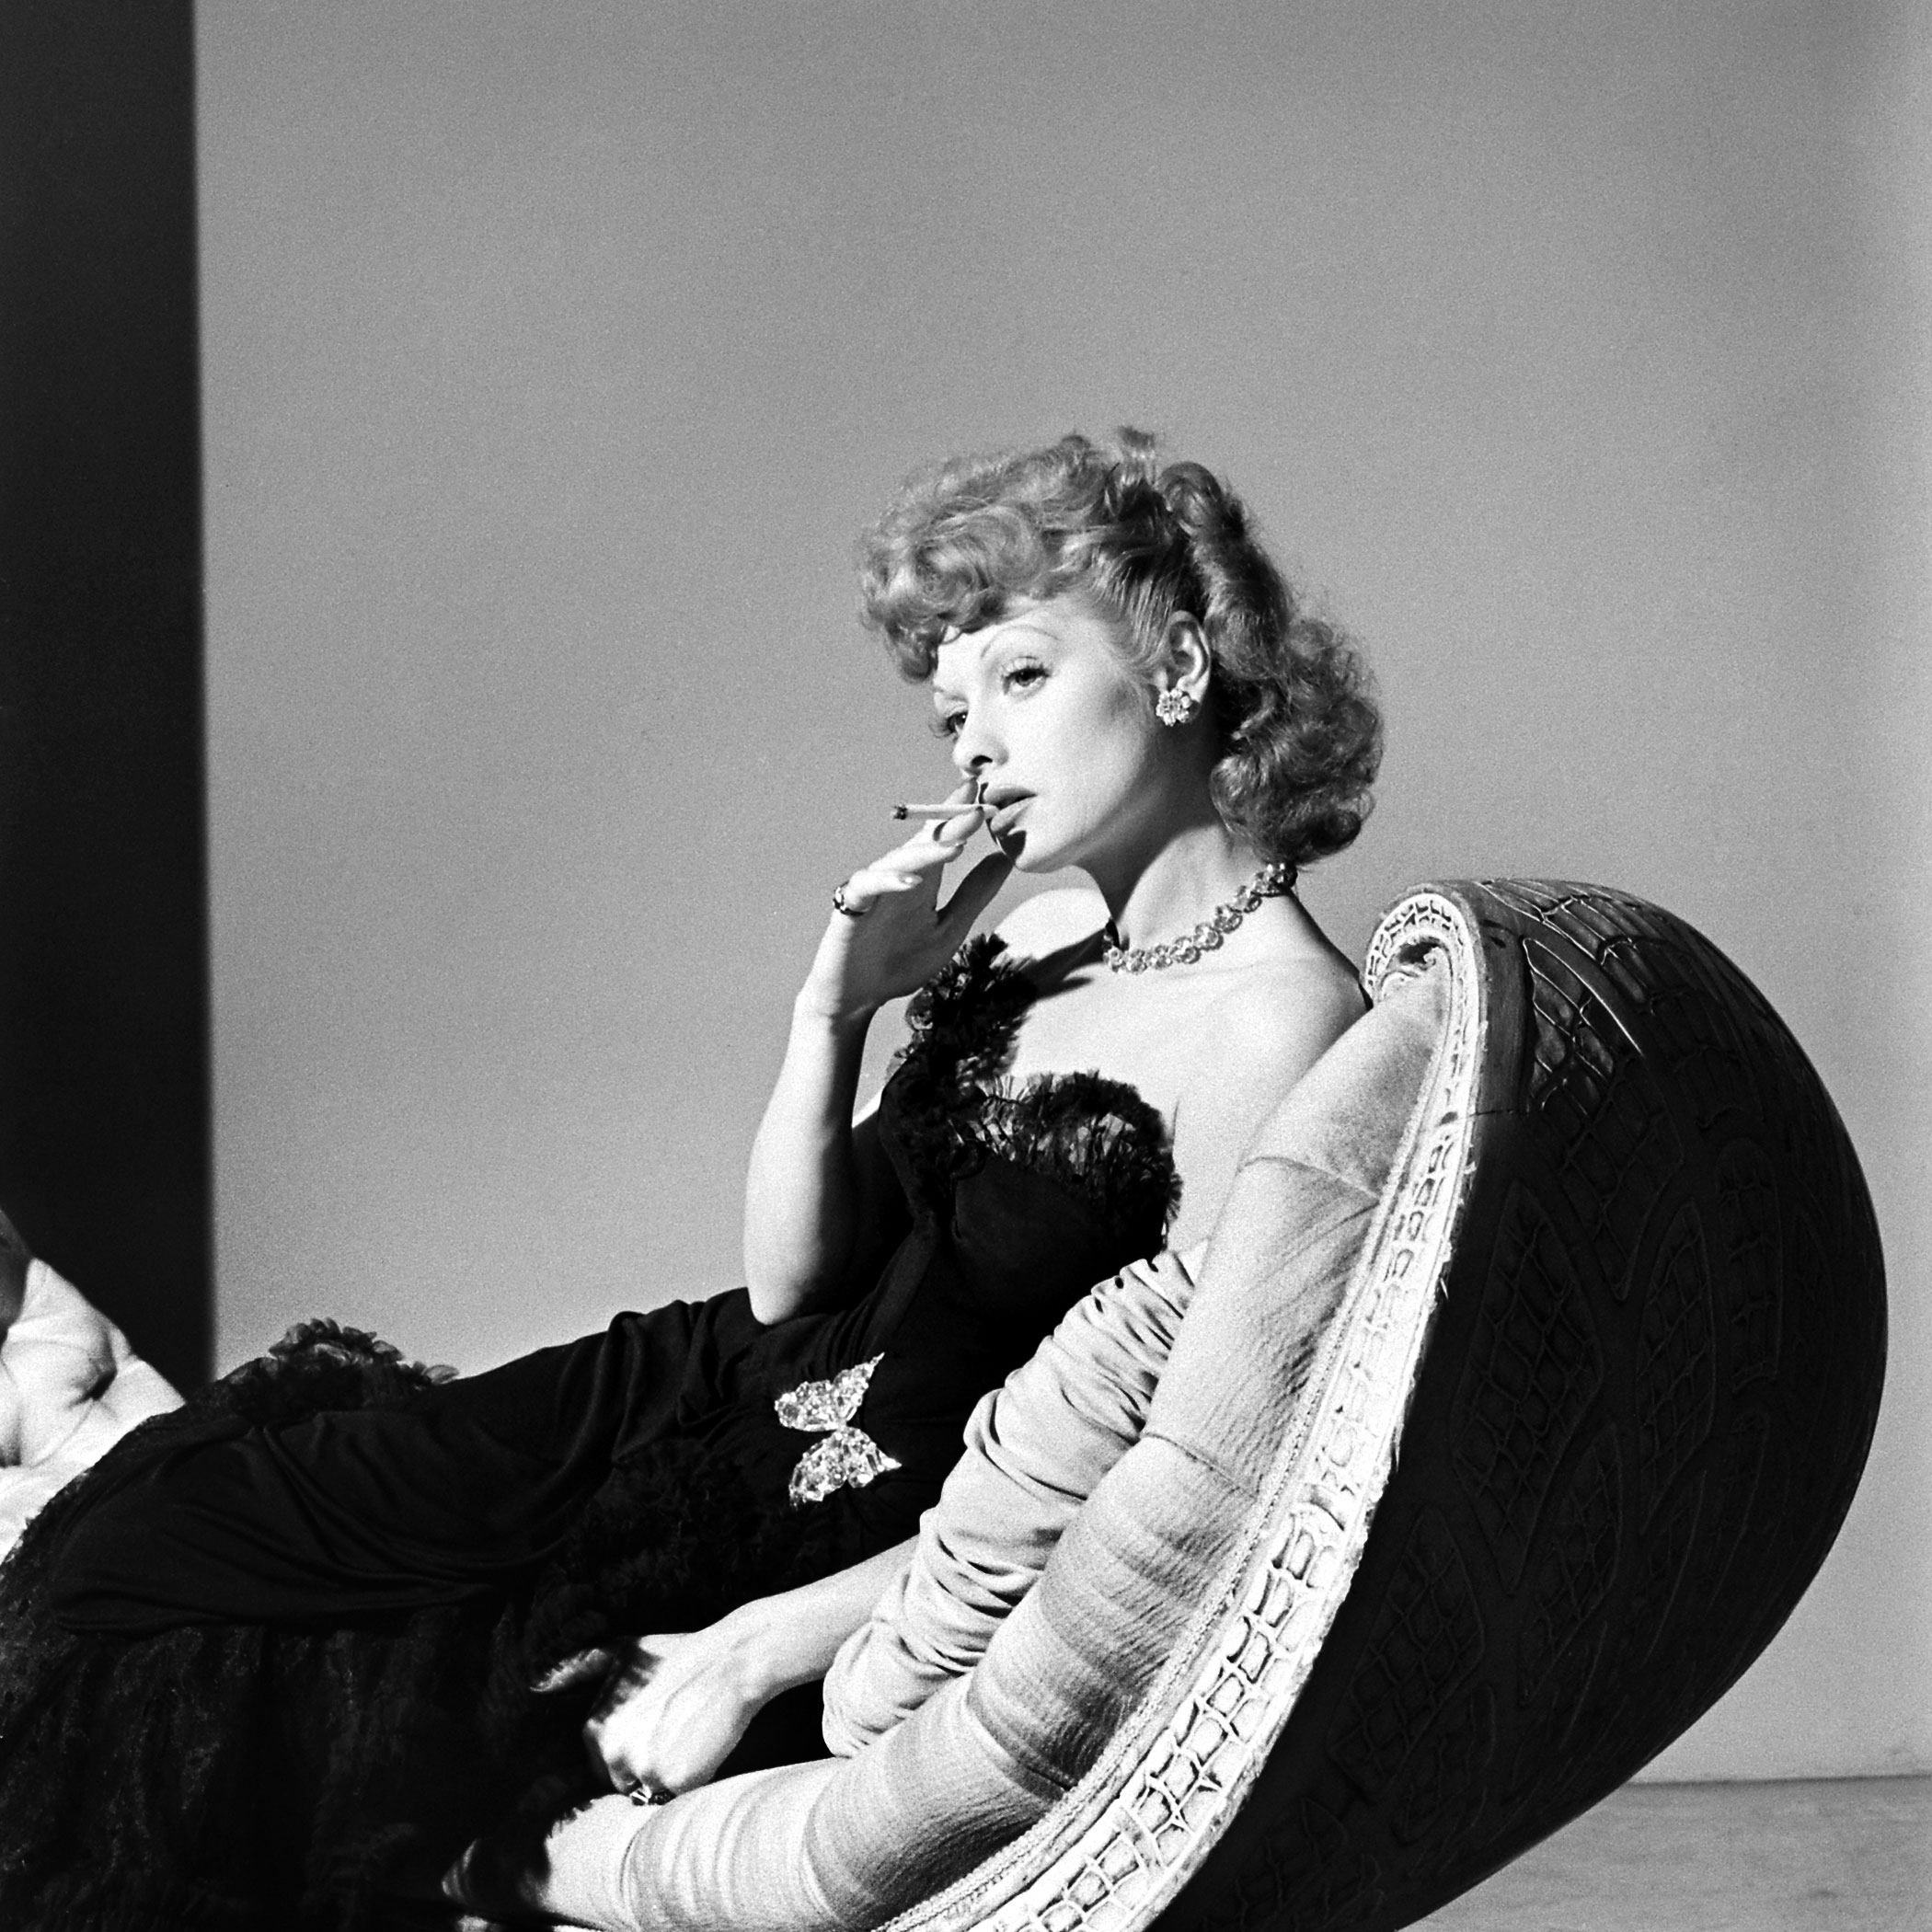 Lucille Ball, 1942. An outtake from John Florea's 1942 photo essay on Ball, which touted her as being on the brink of fame after a decade of kicking around Hollywood.